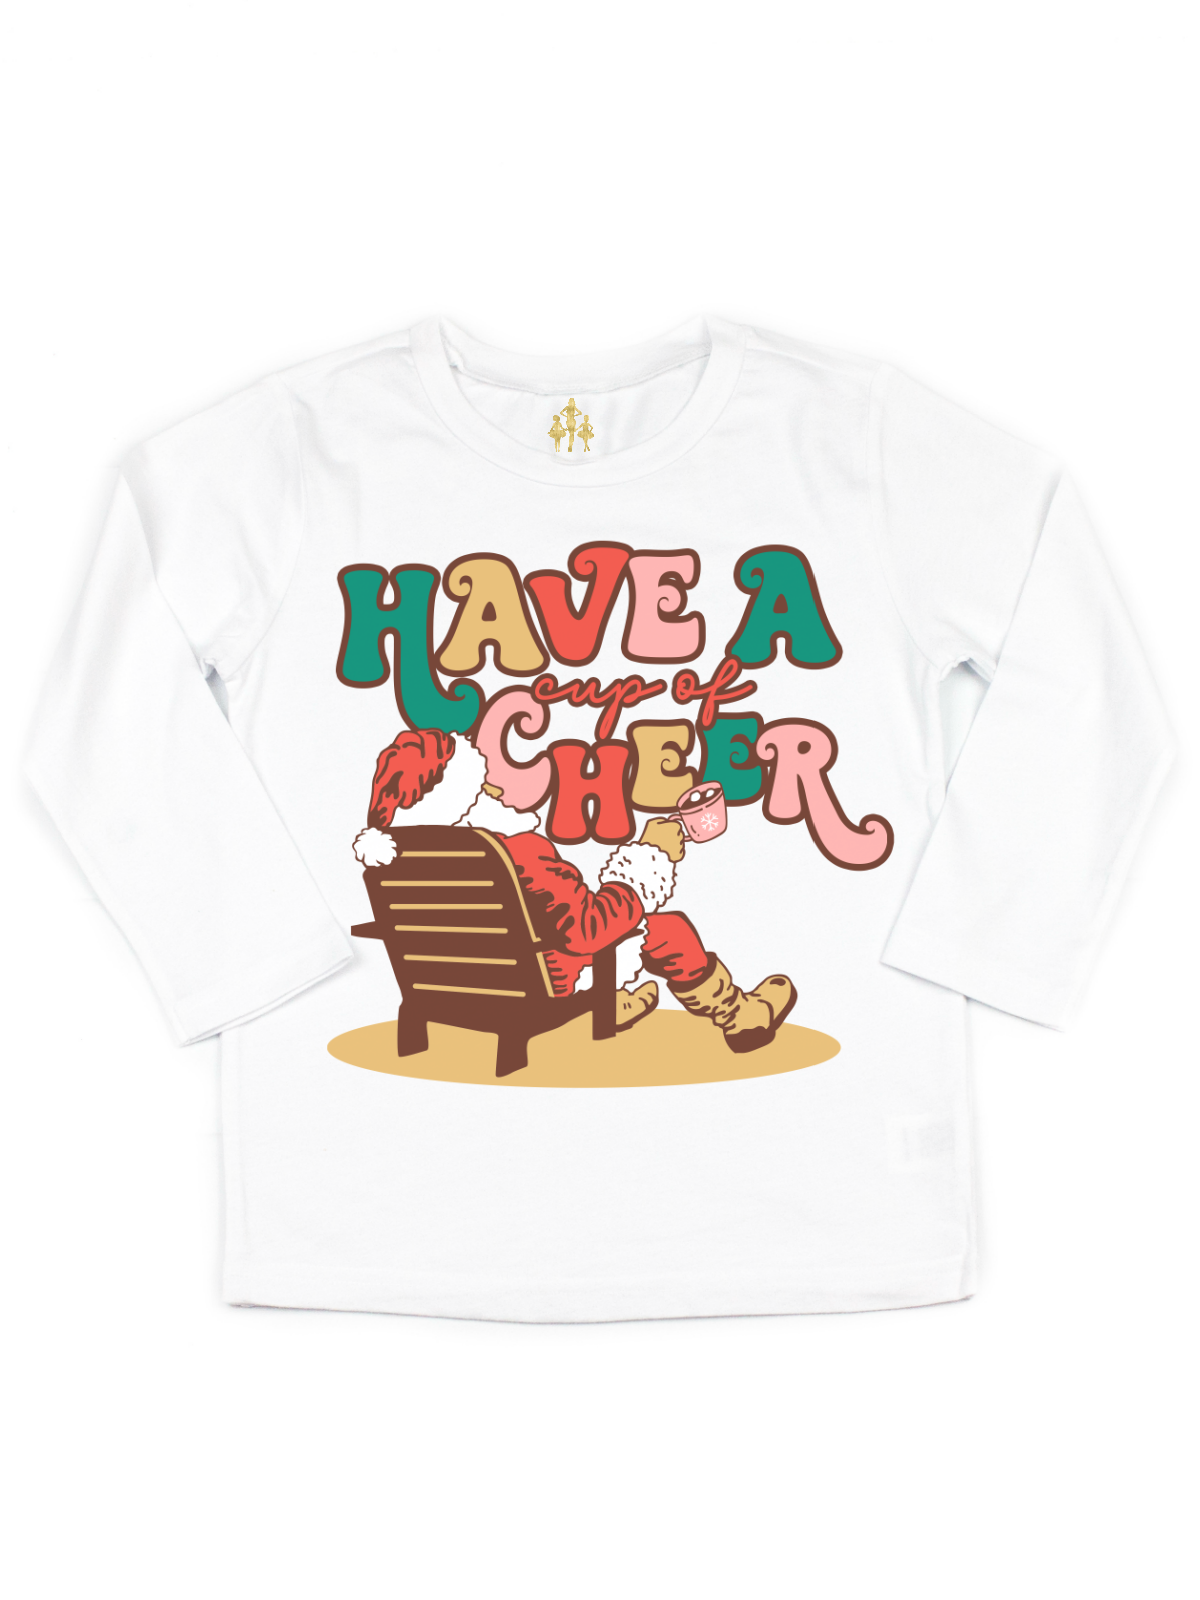 Have a Cup of Cheer Christmas Shirt Kids